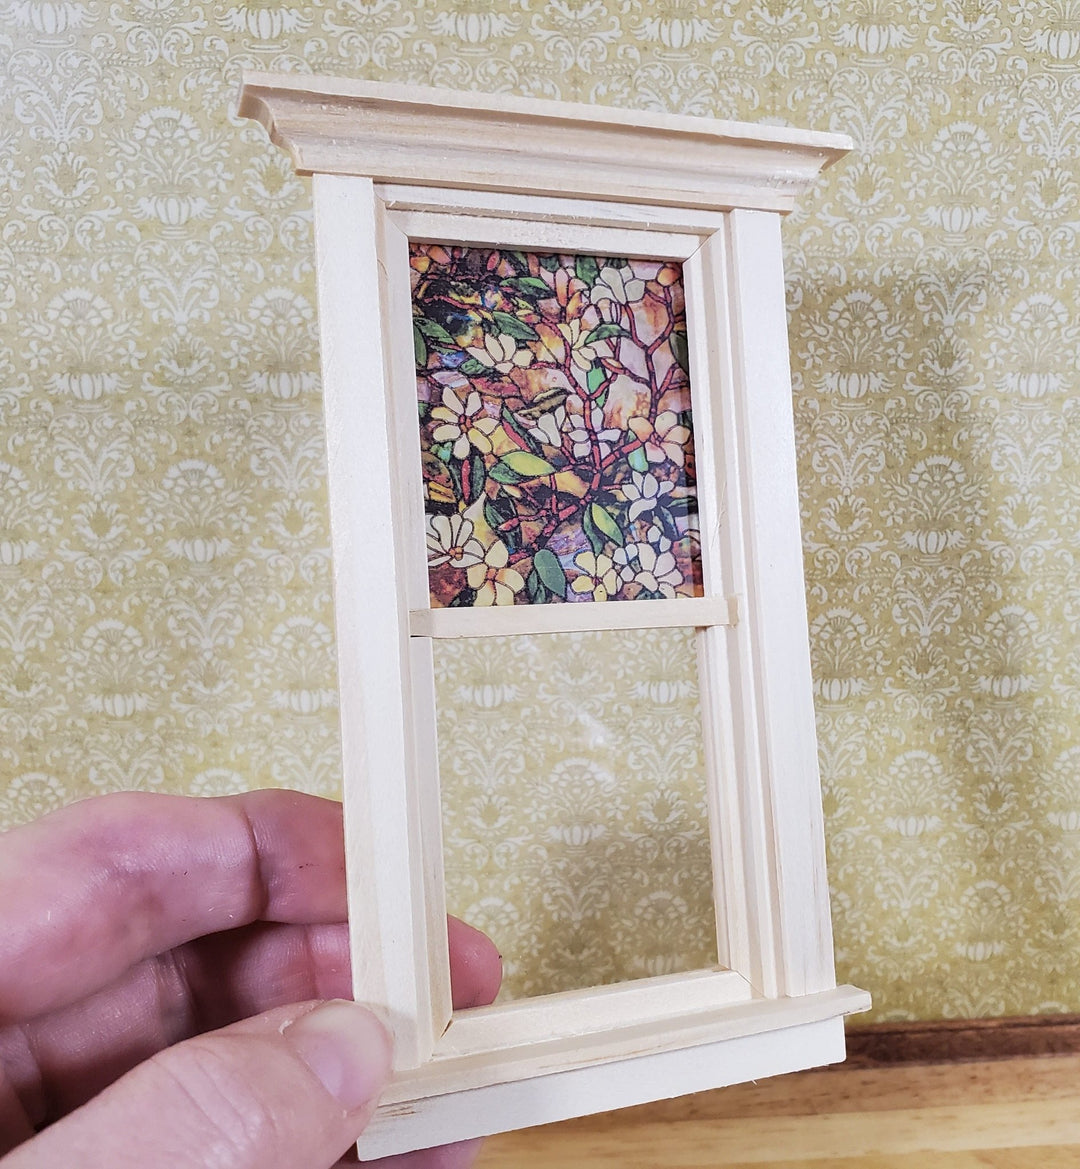 Dollhouse Simulated Stained Glass Insert Cut to Size Flowers for Windows or Doors 1:12 Scale - Miniature Crush